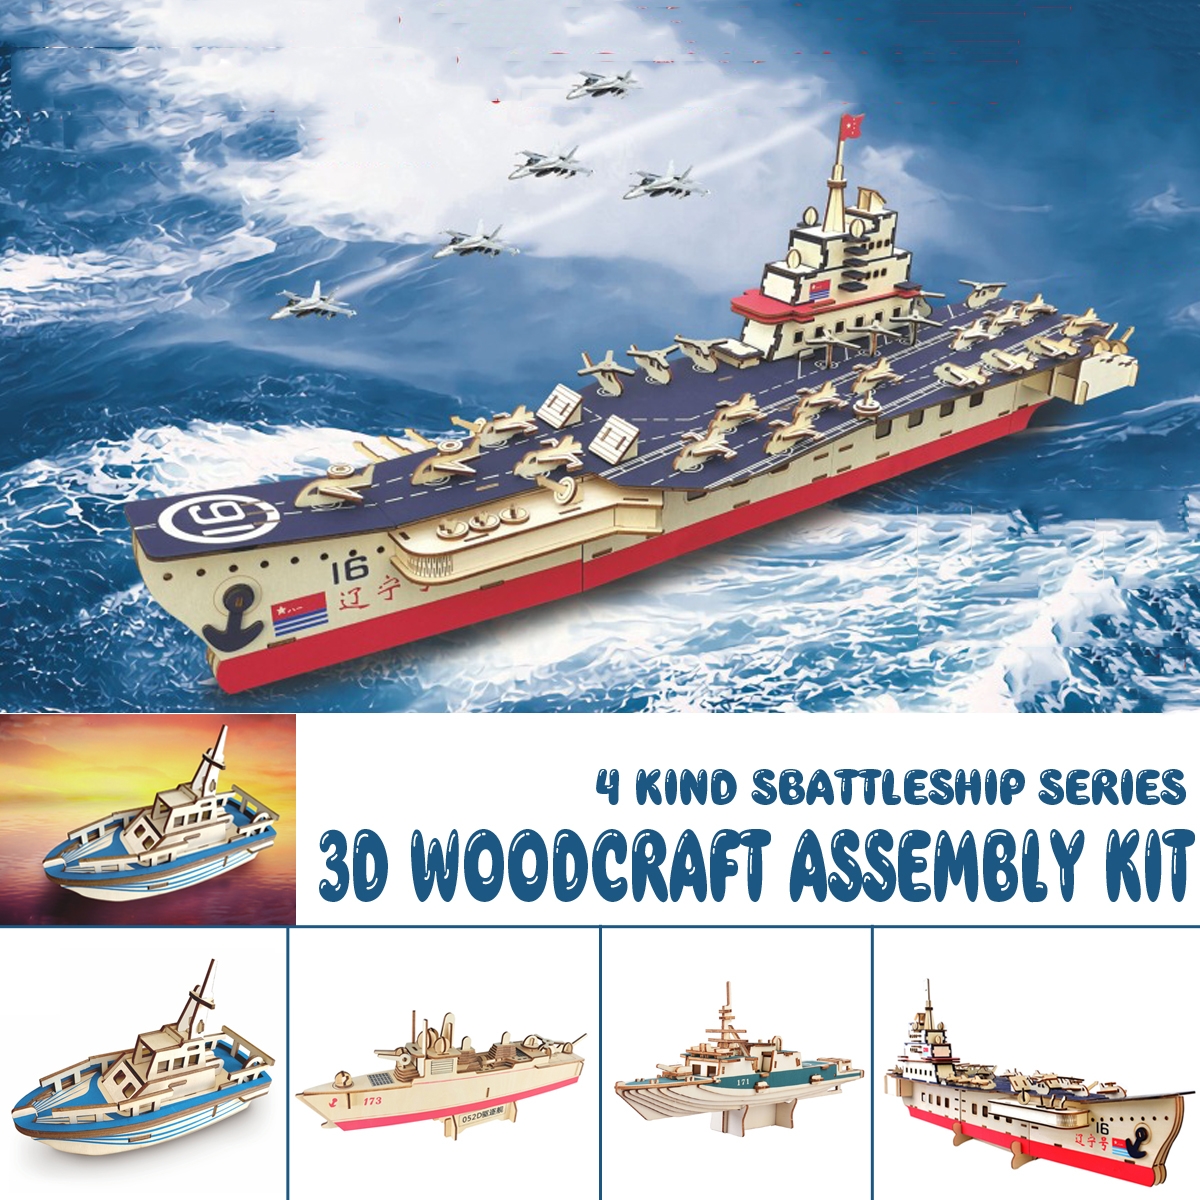 3D Woodcraft Assembly Battleship Series Kit Jigsaw Puzzle Decoration Toy Model for Kids Gift